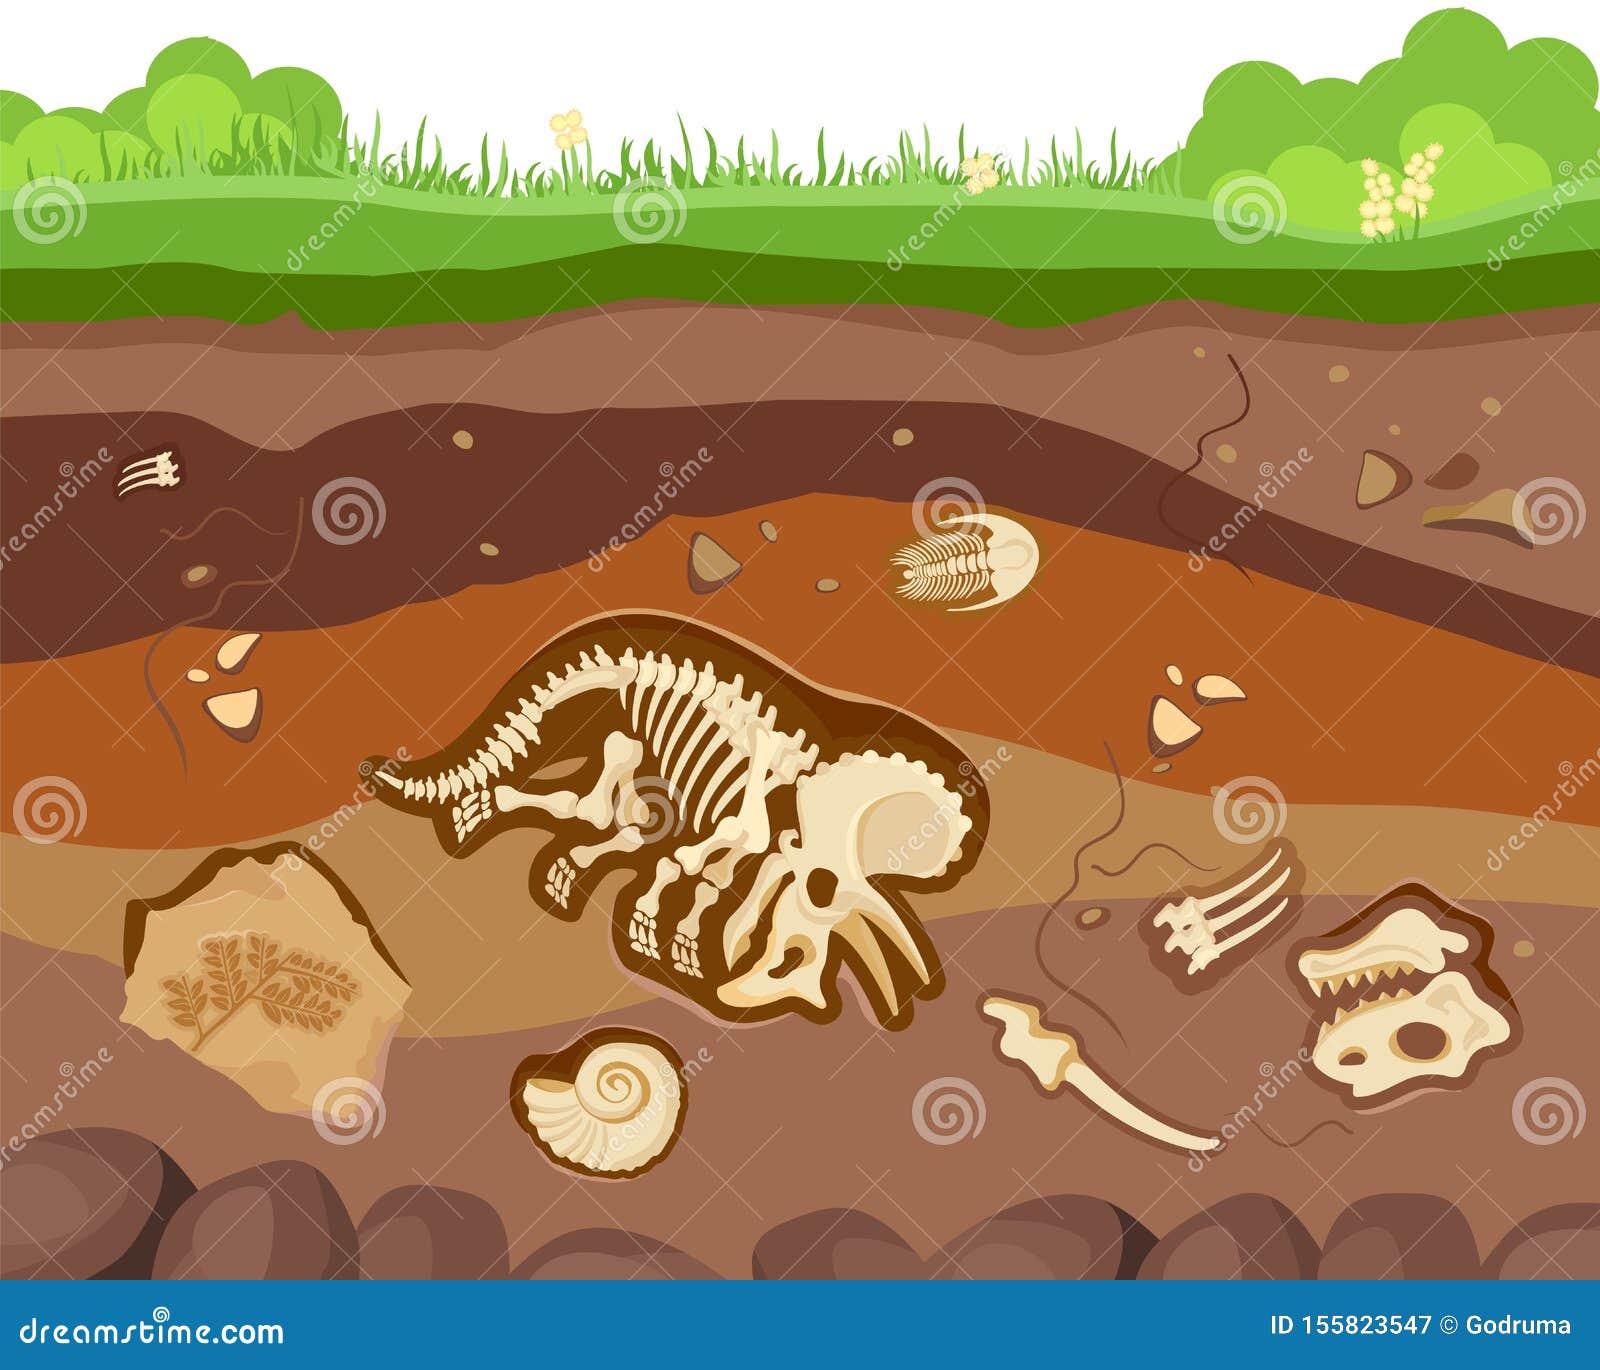 soil ground layers with buried fossil animals, dinosaur, crustaceans and bones.  flat style cartoon 